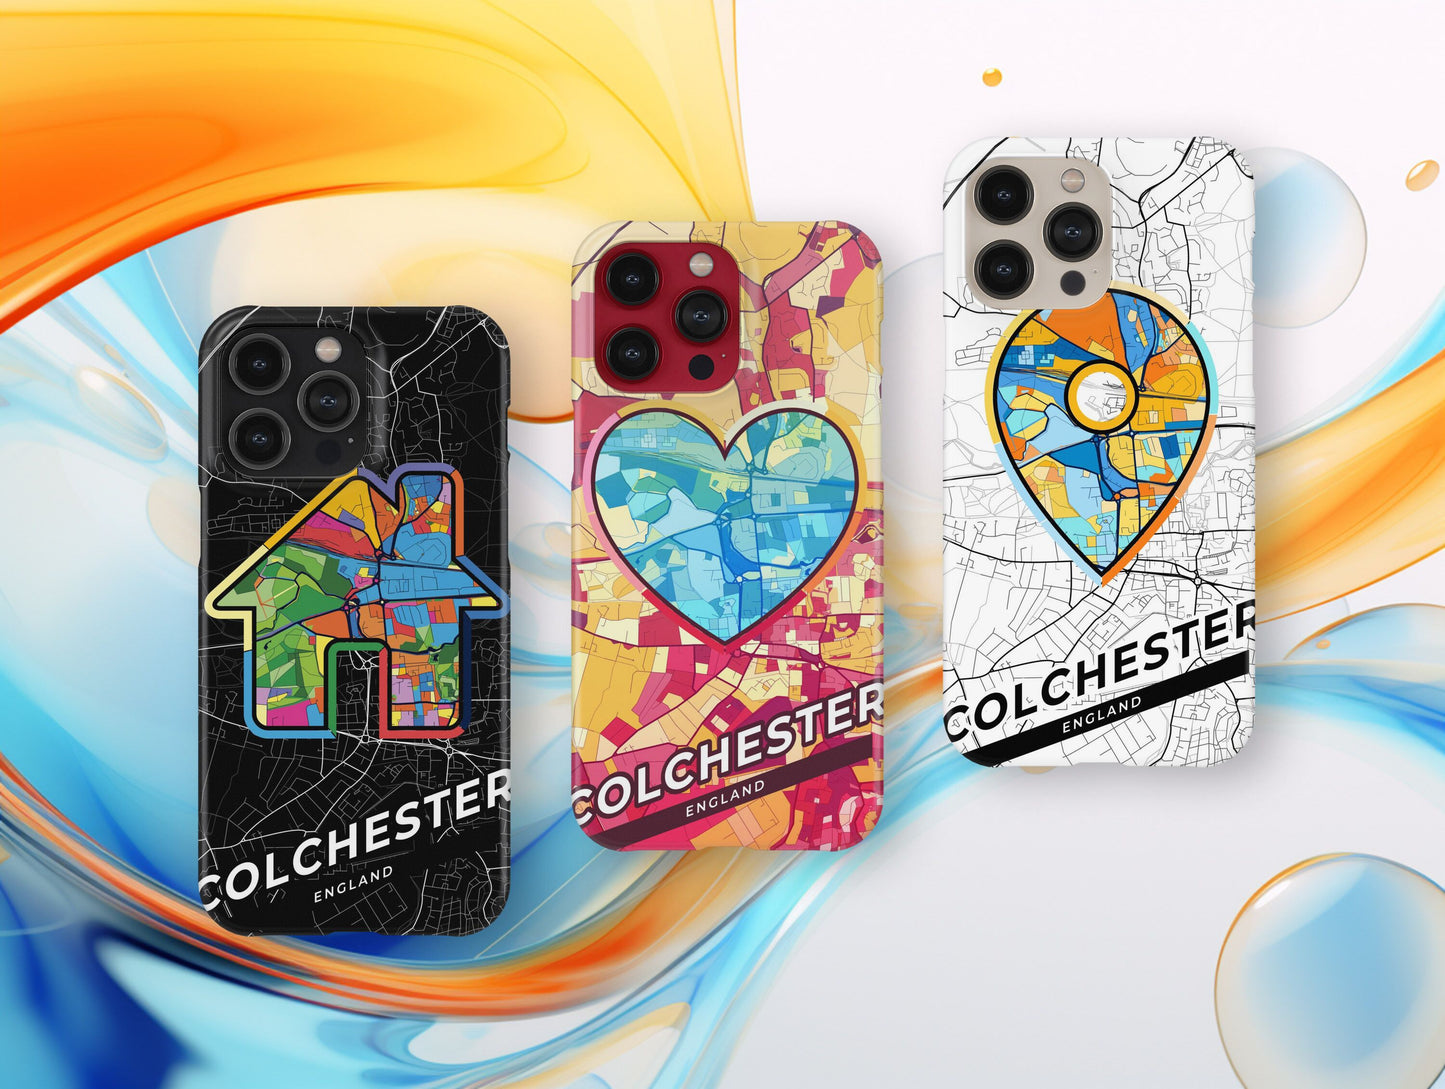 Colchester England slim phone case with colorful icon. Birthday, wedding or housewarming gift. Couple match cases.